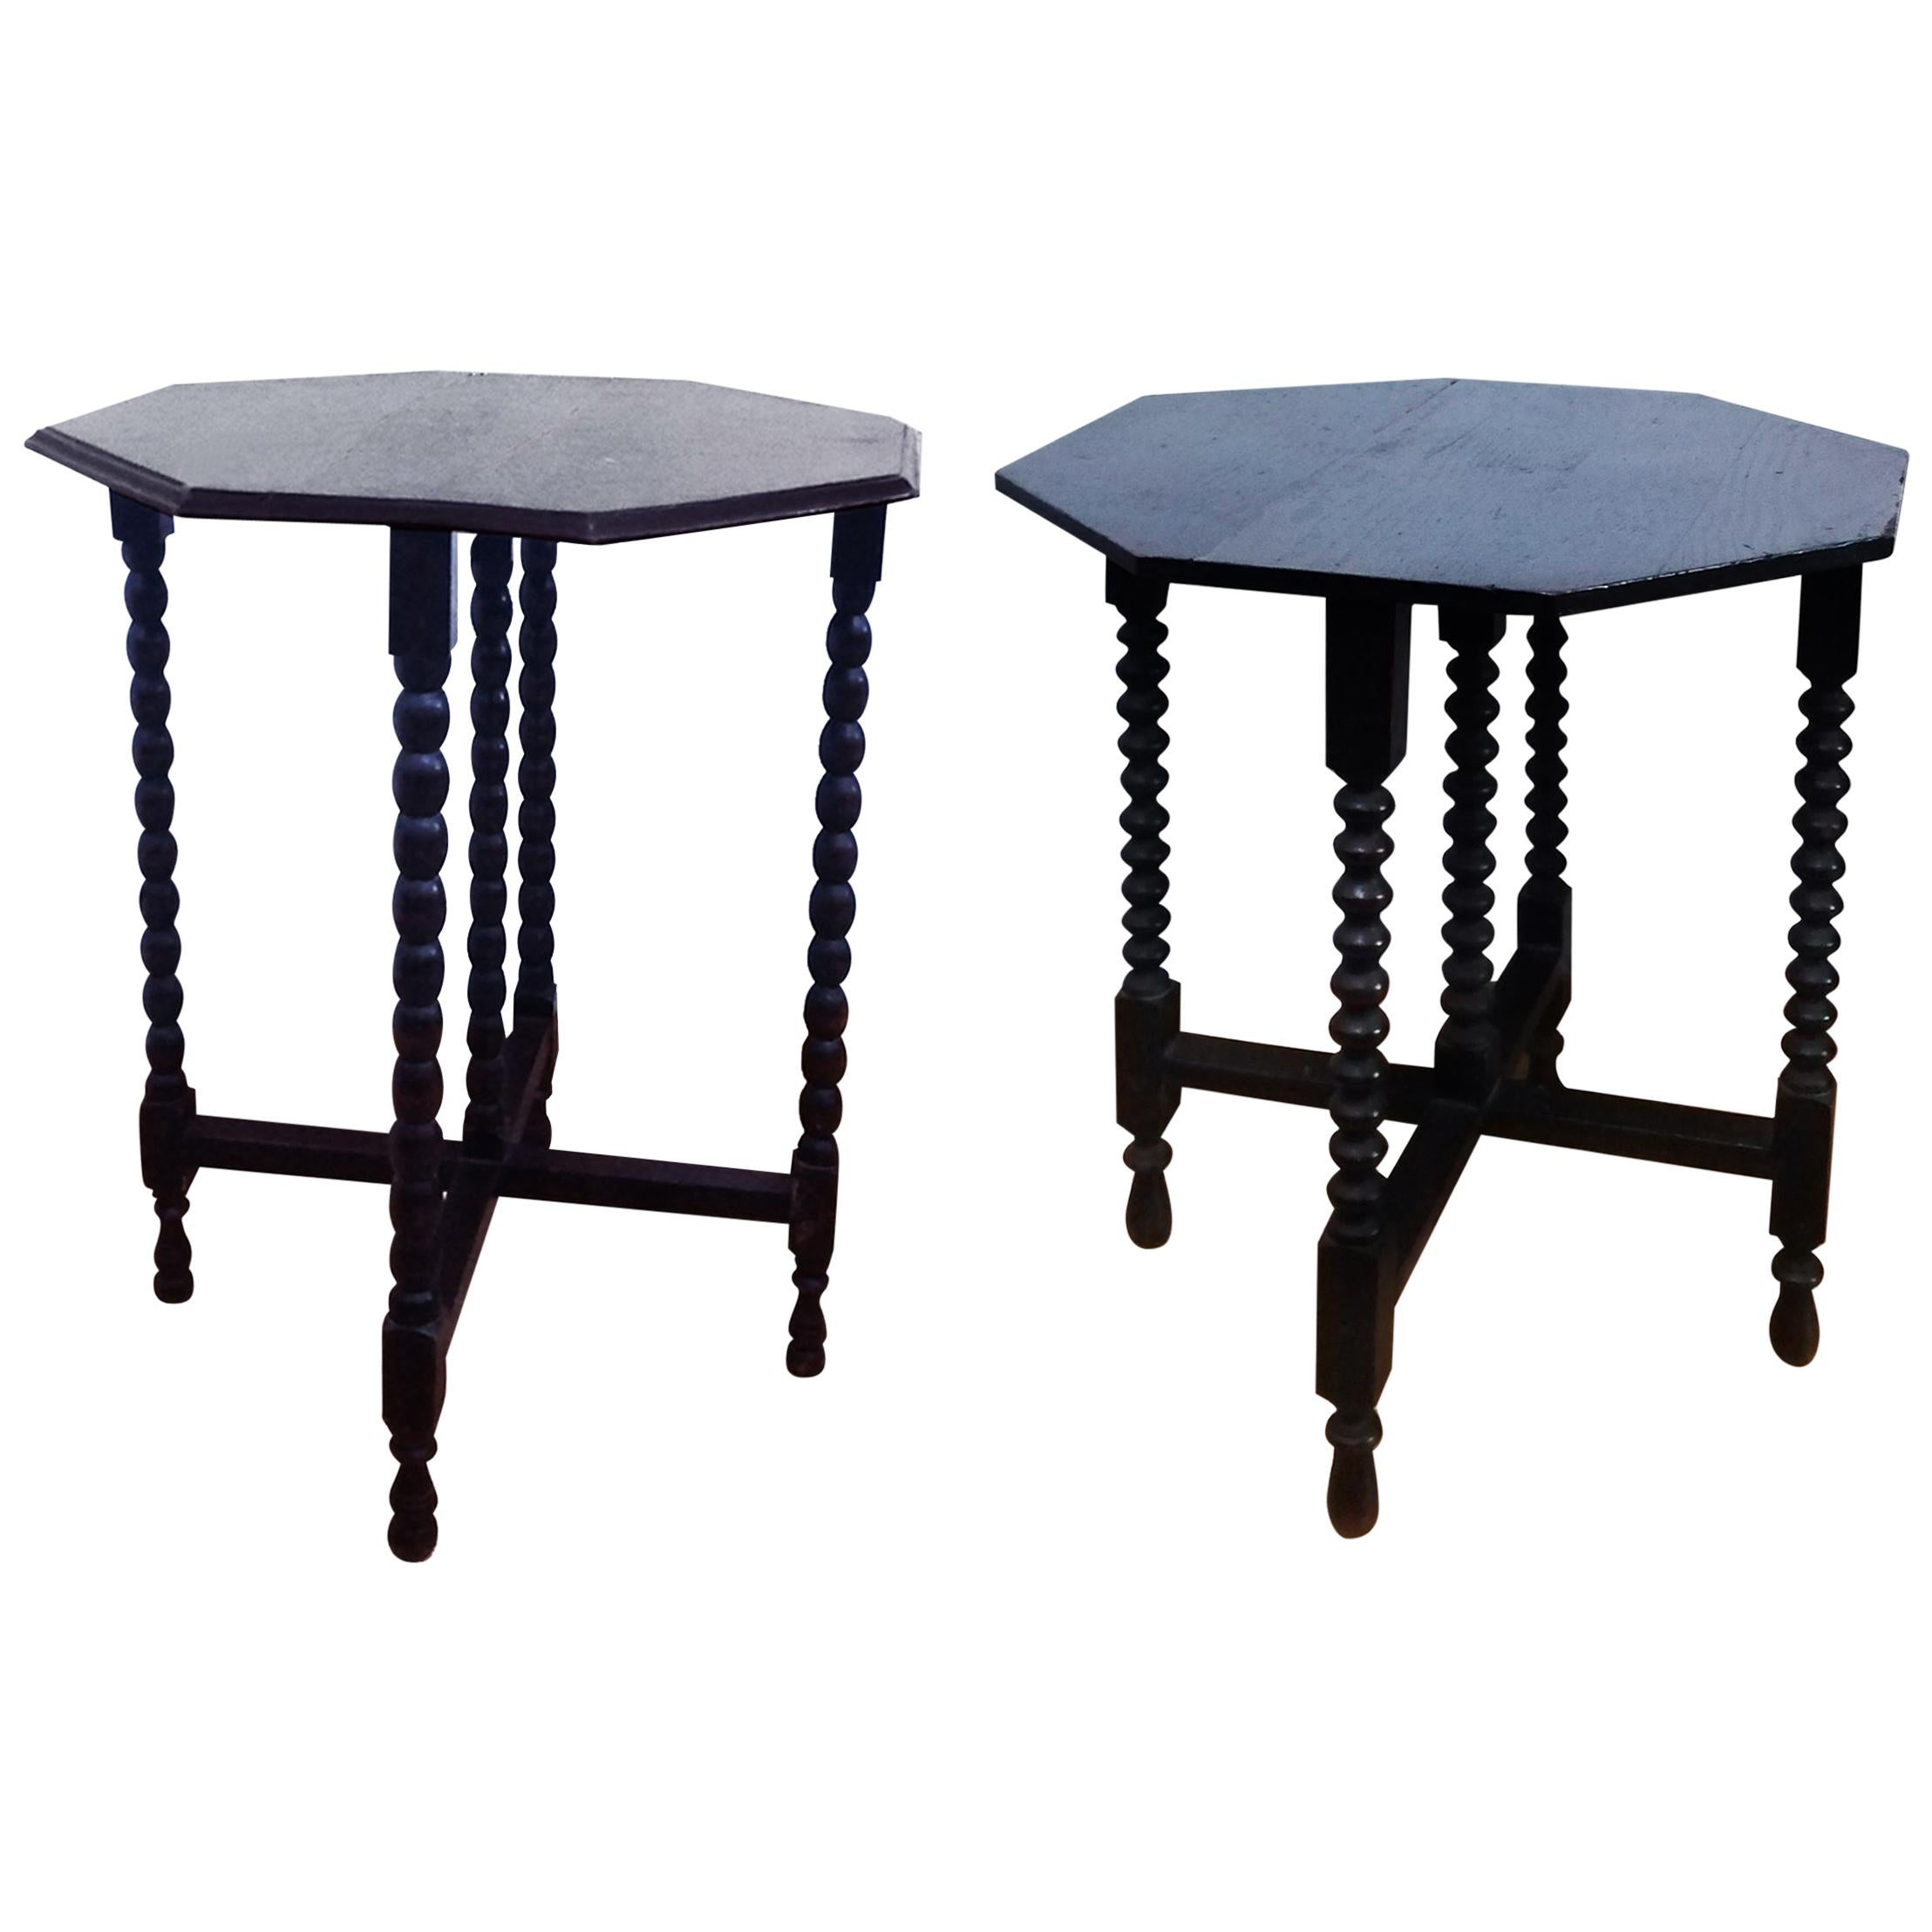 Pair of Antique Bobbin Turned Side End Wine Tables from the 19th Century